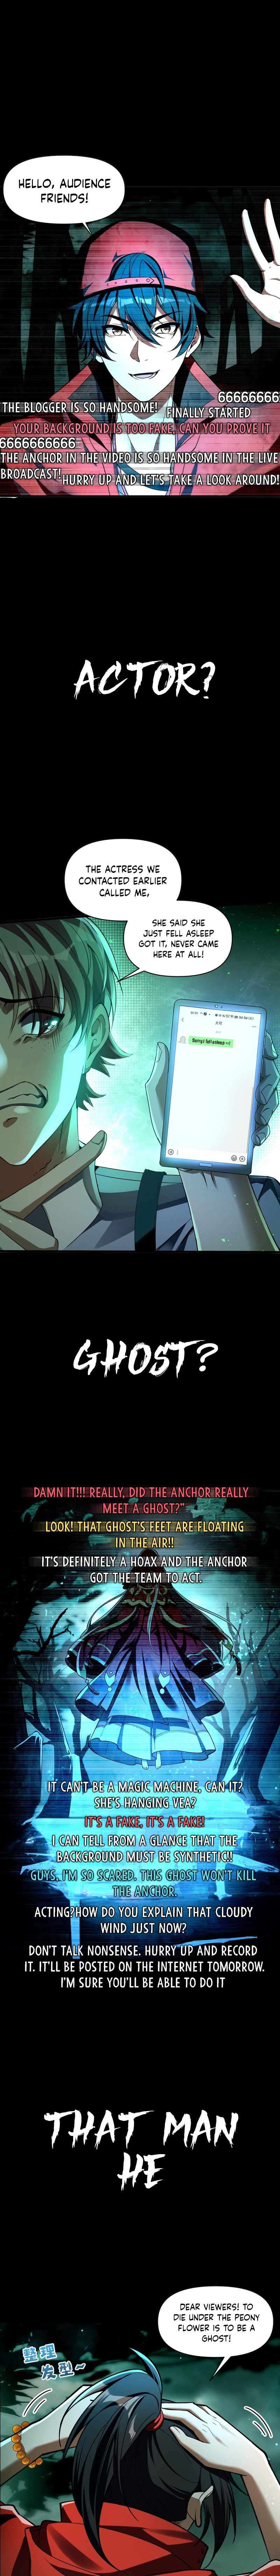 During The Live Streaming, I Proposed To A Female Ghost And She Actually Agreed?! - chapter 0 - #2